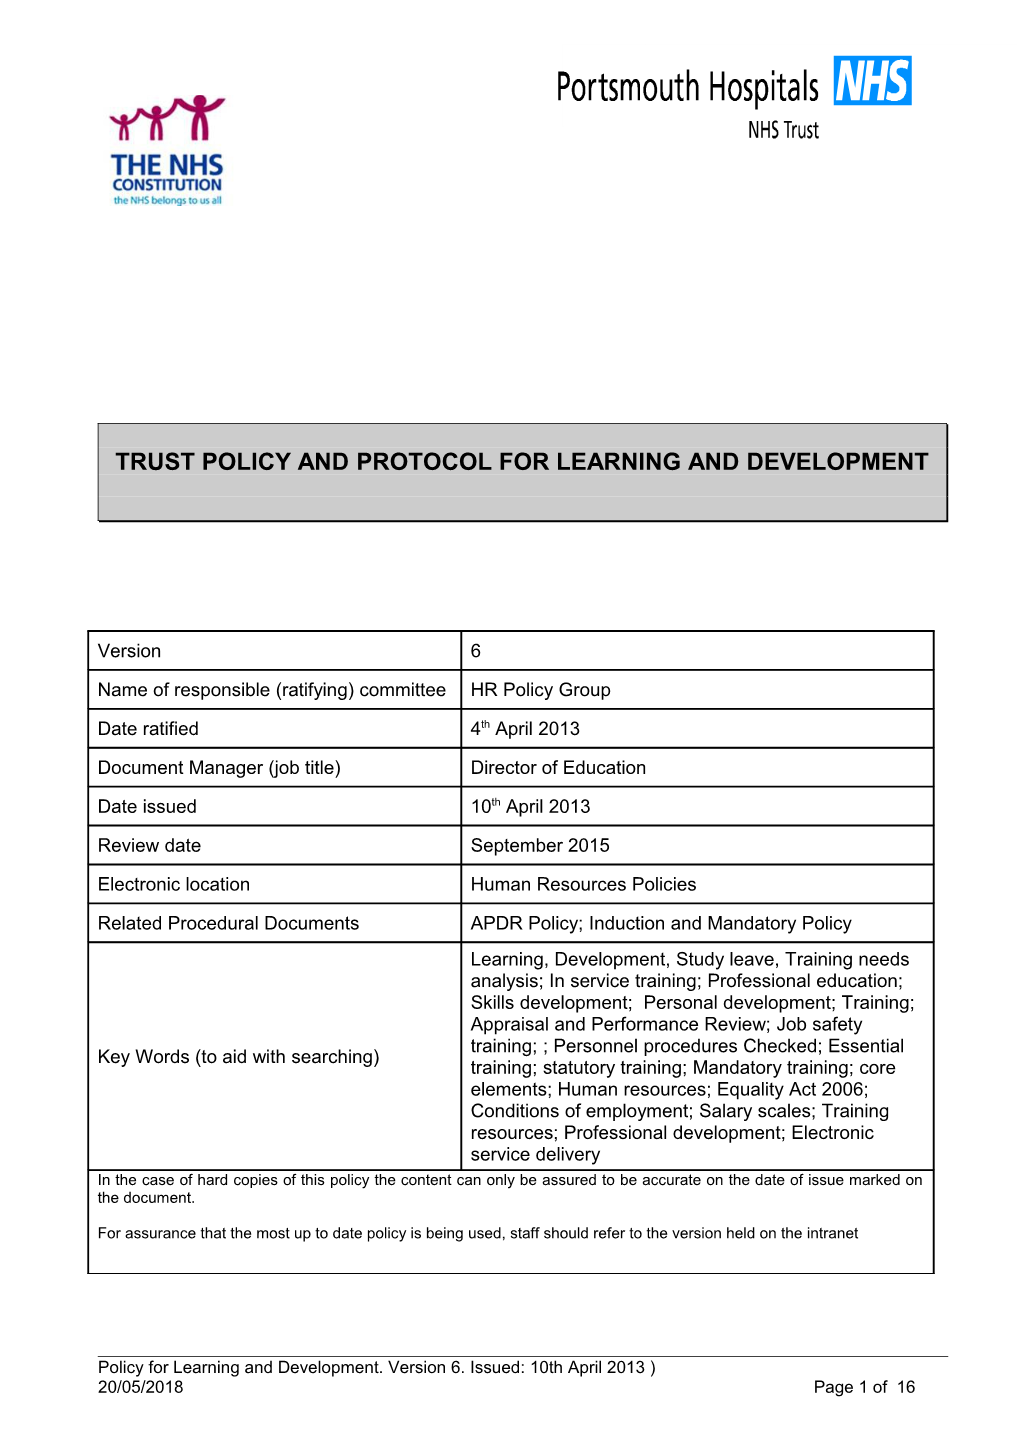 Portsmouth Hospitals Learning and Development Policy